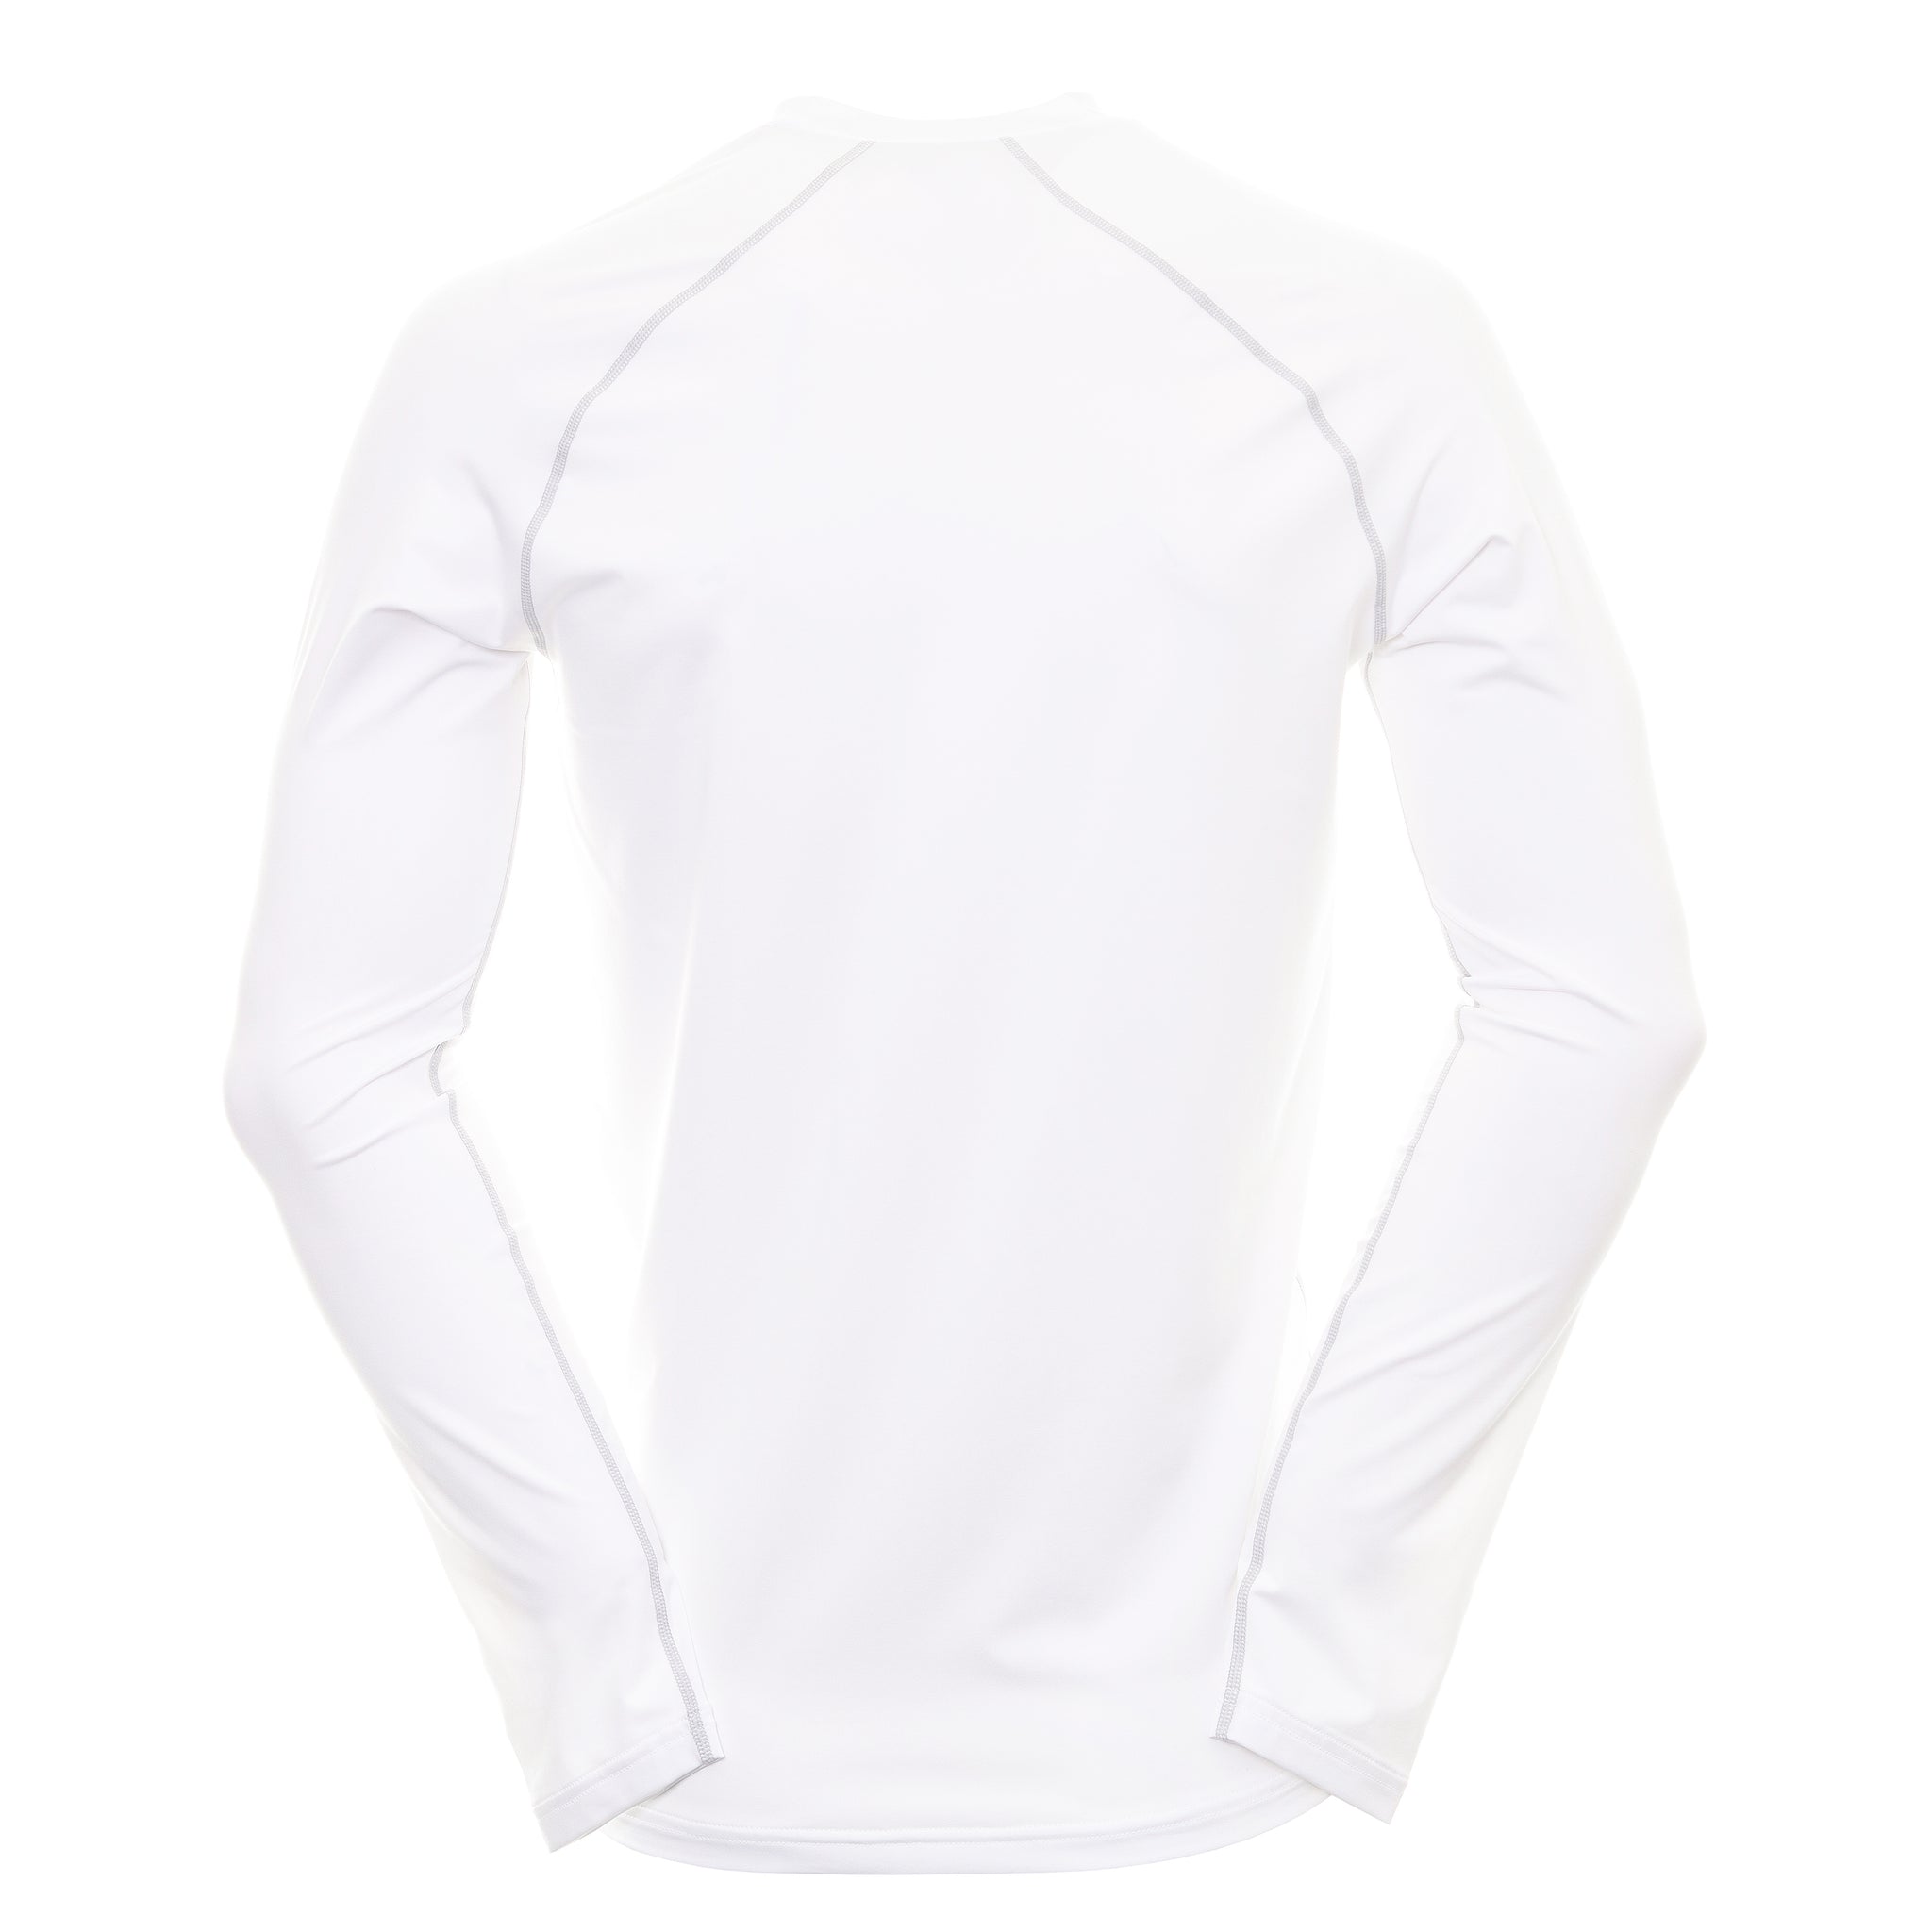 Galvin Green Enzo Base Layer White Cool Grey 9235 | Function18